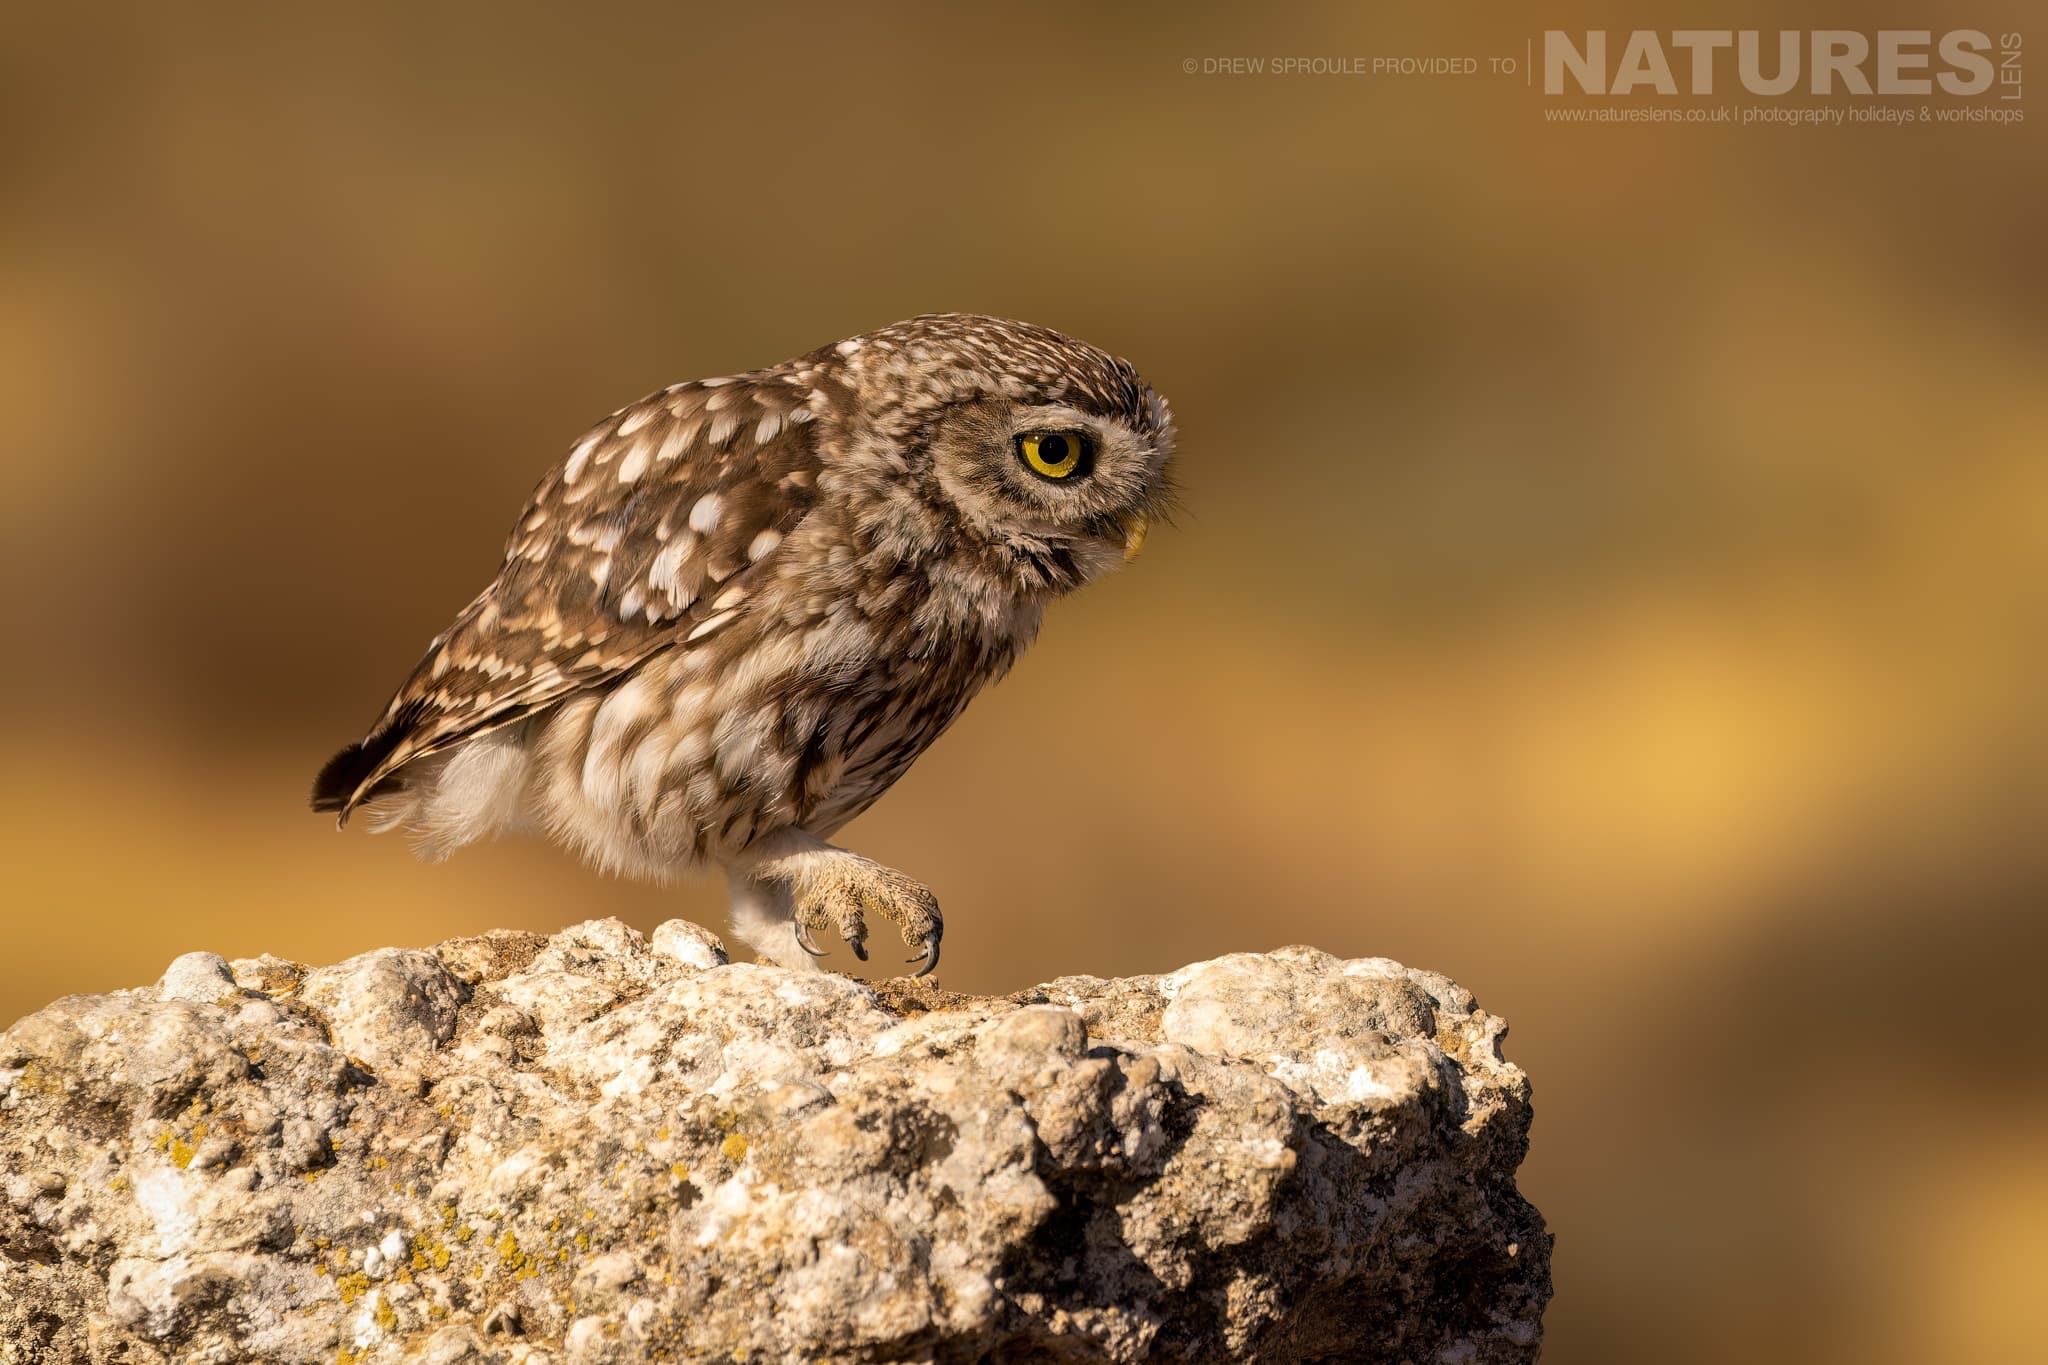 A Striding Little Owl Typical Of The Type Of Image You Will Have Opportunities To Capture During Our Birds Of Toledo Photography Holiday